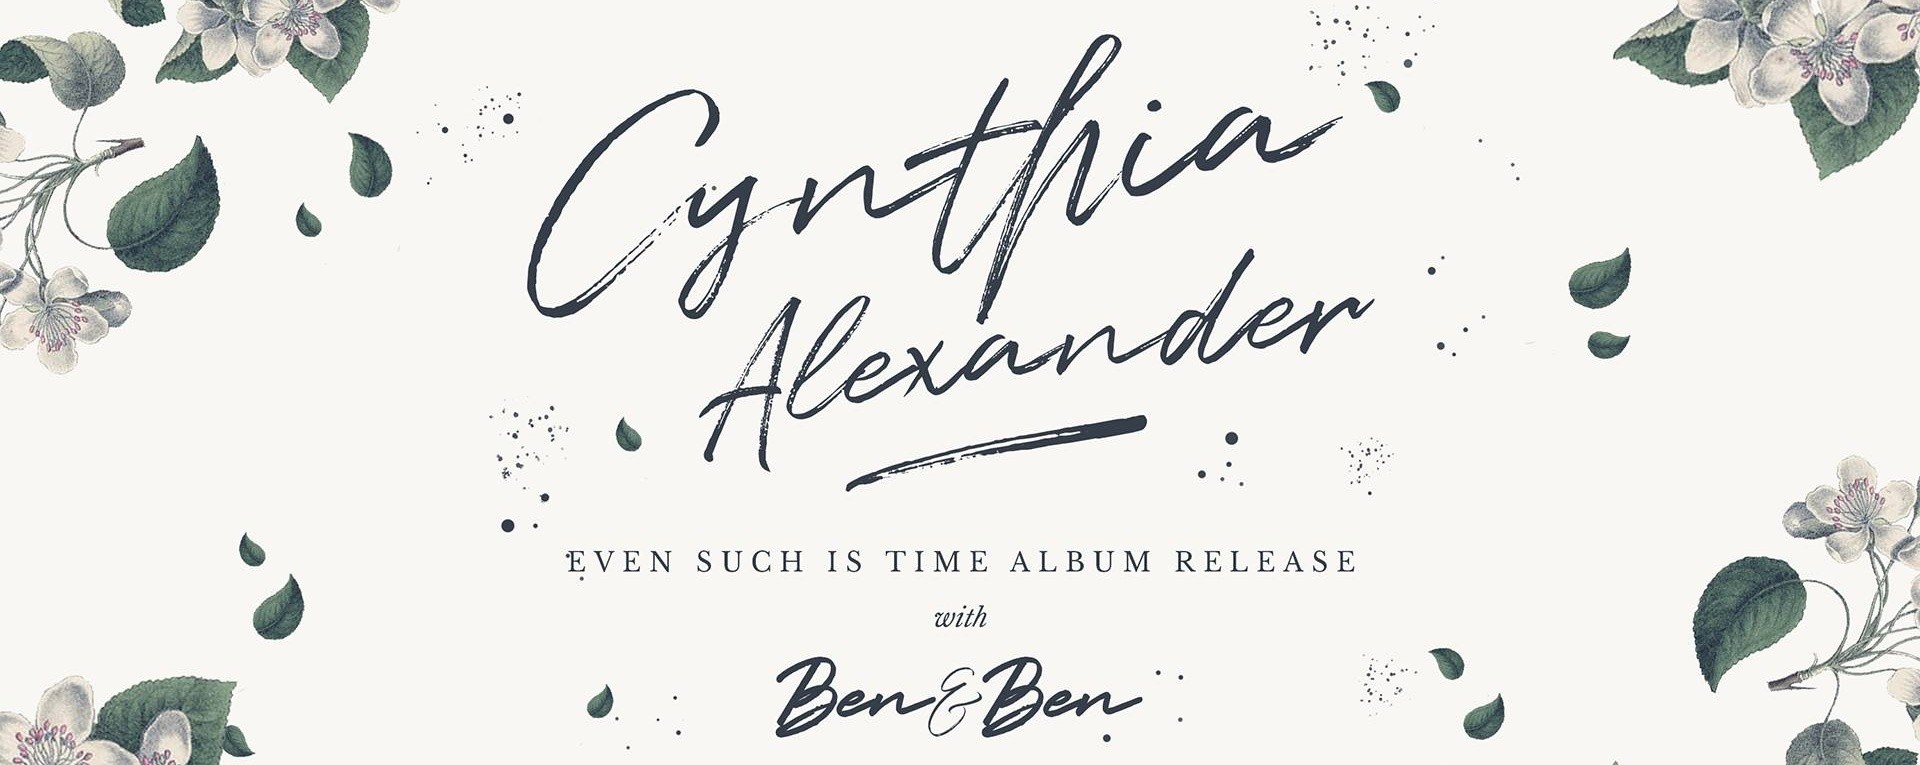 Cynthia Alexander: Even Such Is Time Album Release with Ben&Ben